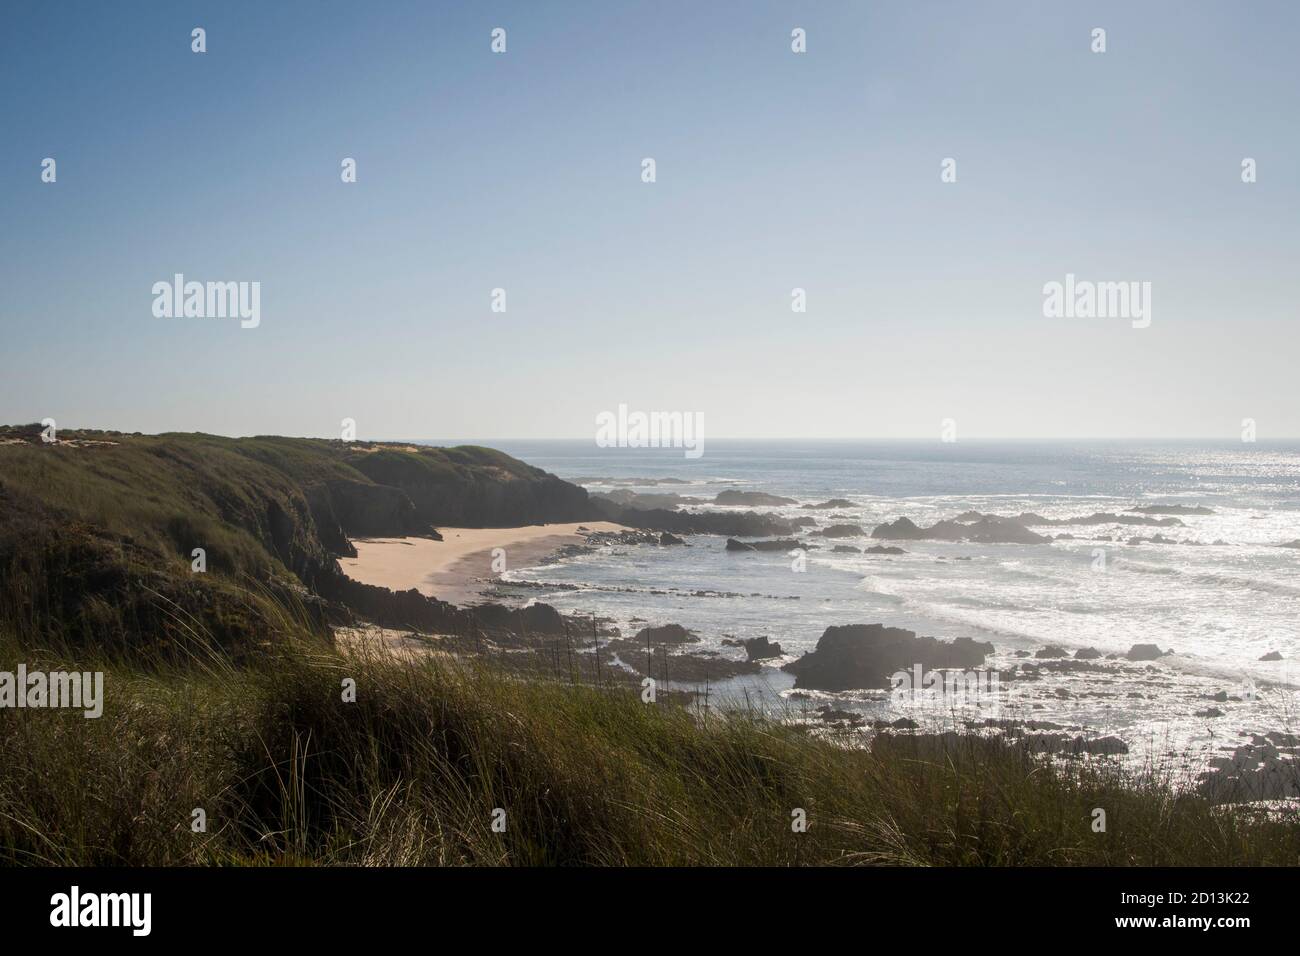 Beach landscape line with wave lines coming ashore and cliffs entering the sand, under a blue sky and sunny day Stock Photo